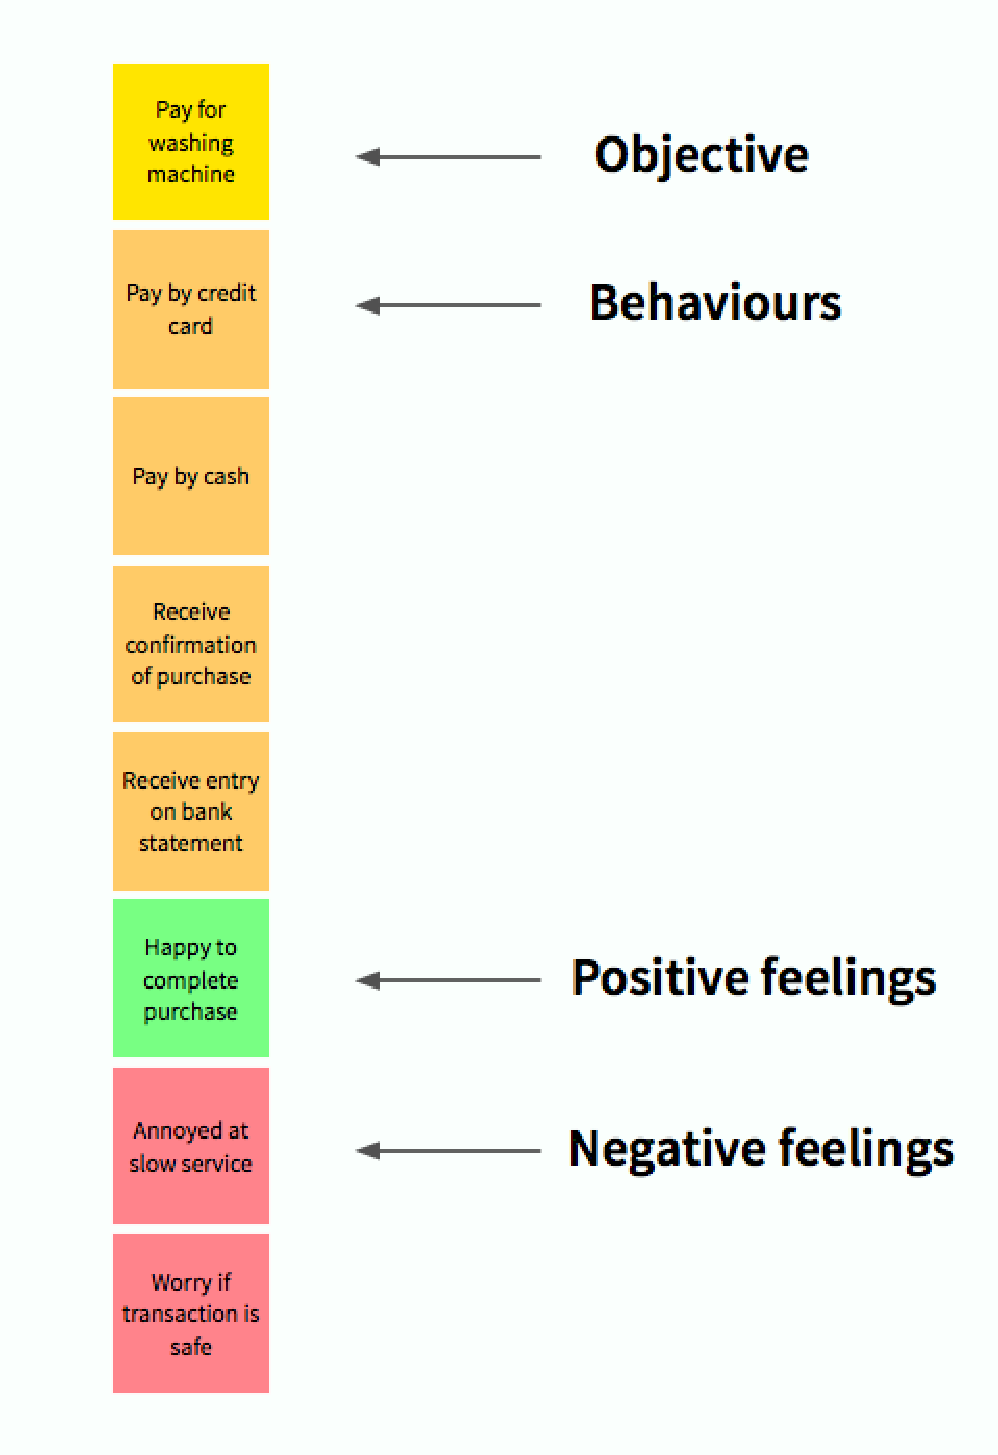 Objective and behaviors